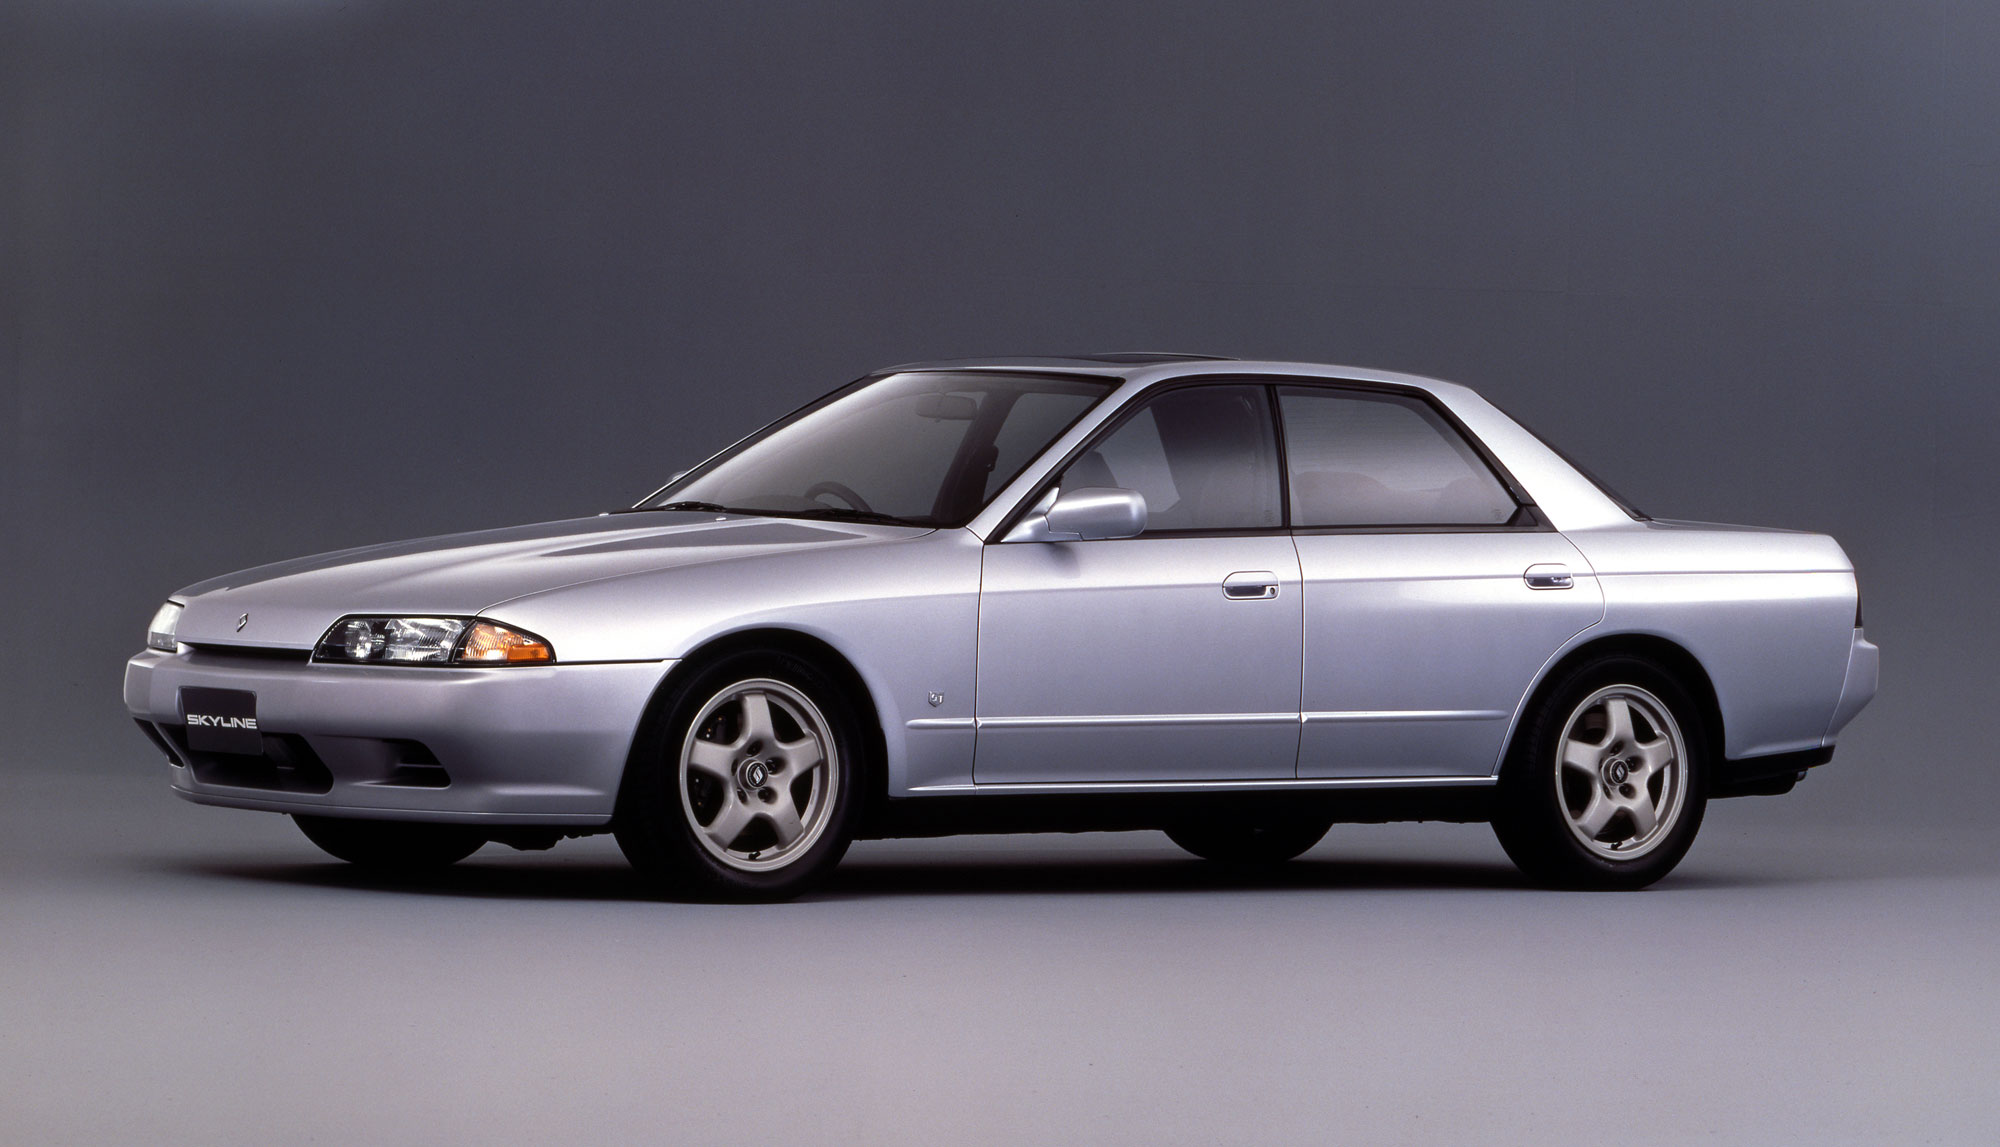 1989 Nissan Skyline GTS-t Type M RCR32. Skyline GT-R, launched in August,